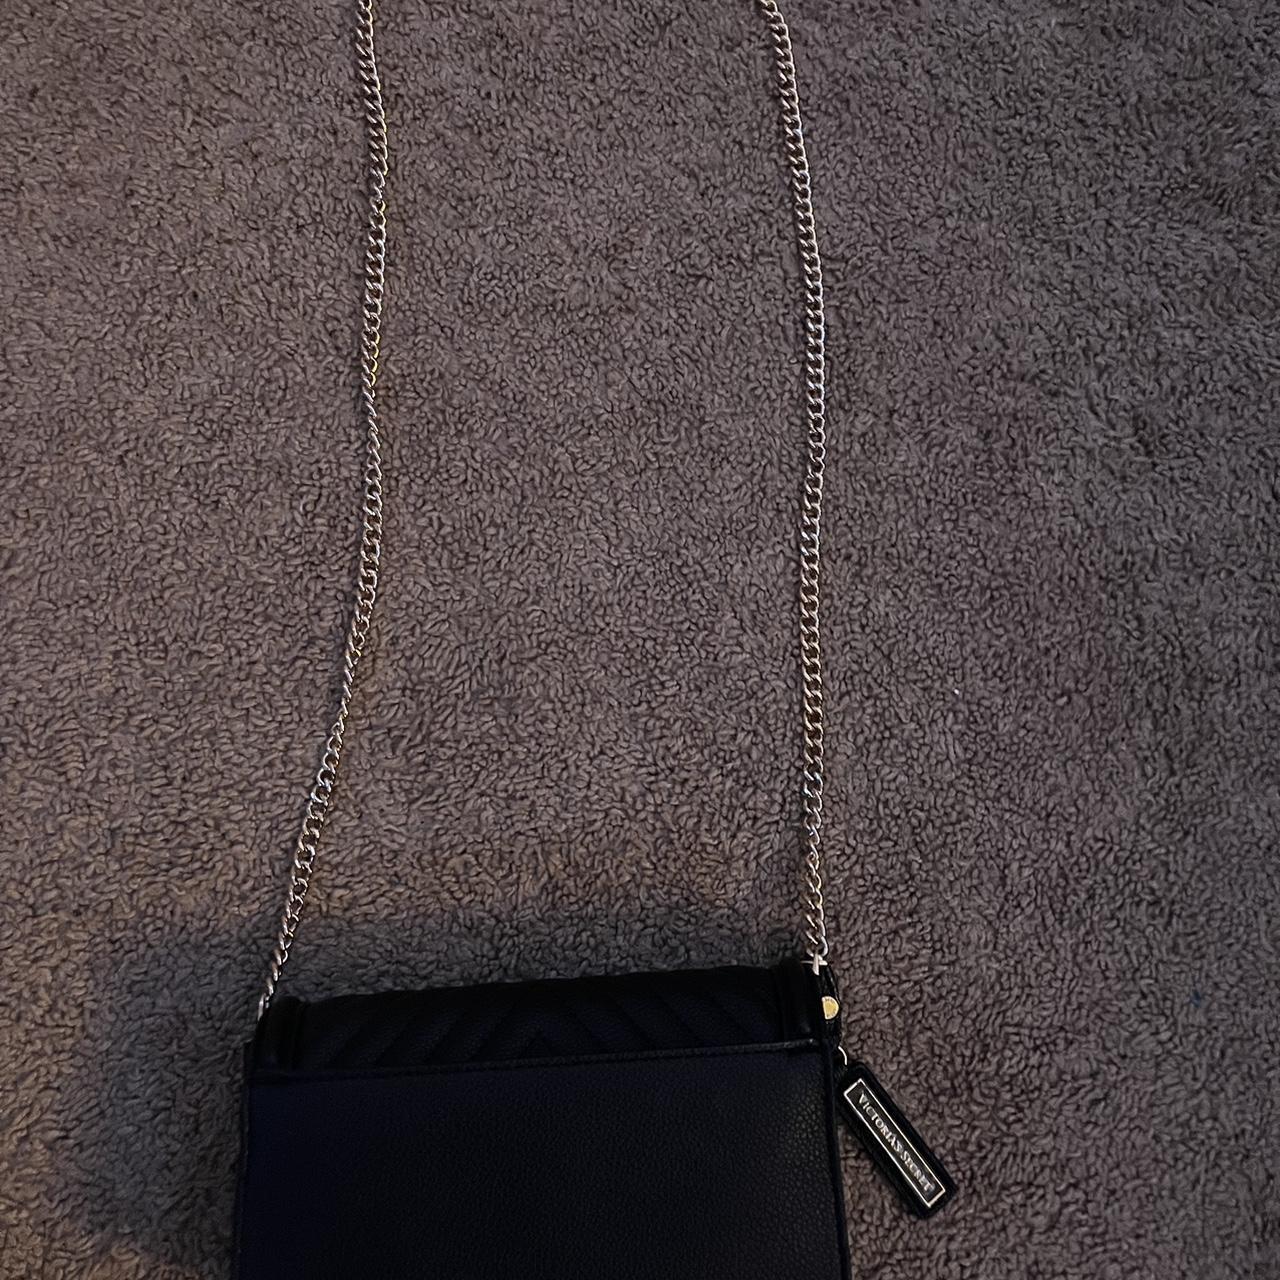 Victoria's secret black purse with gold chain and - Depop